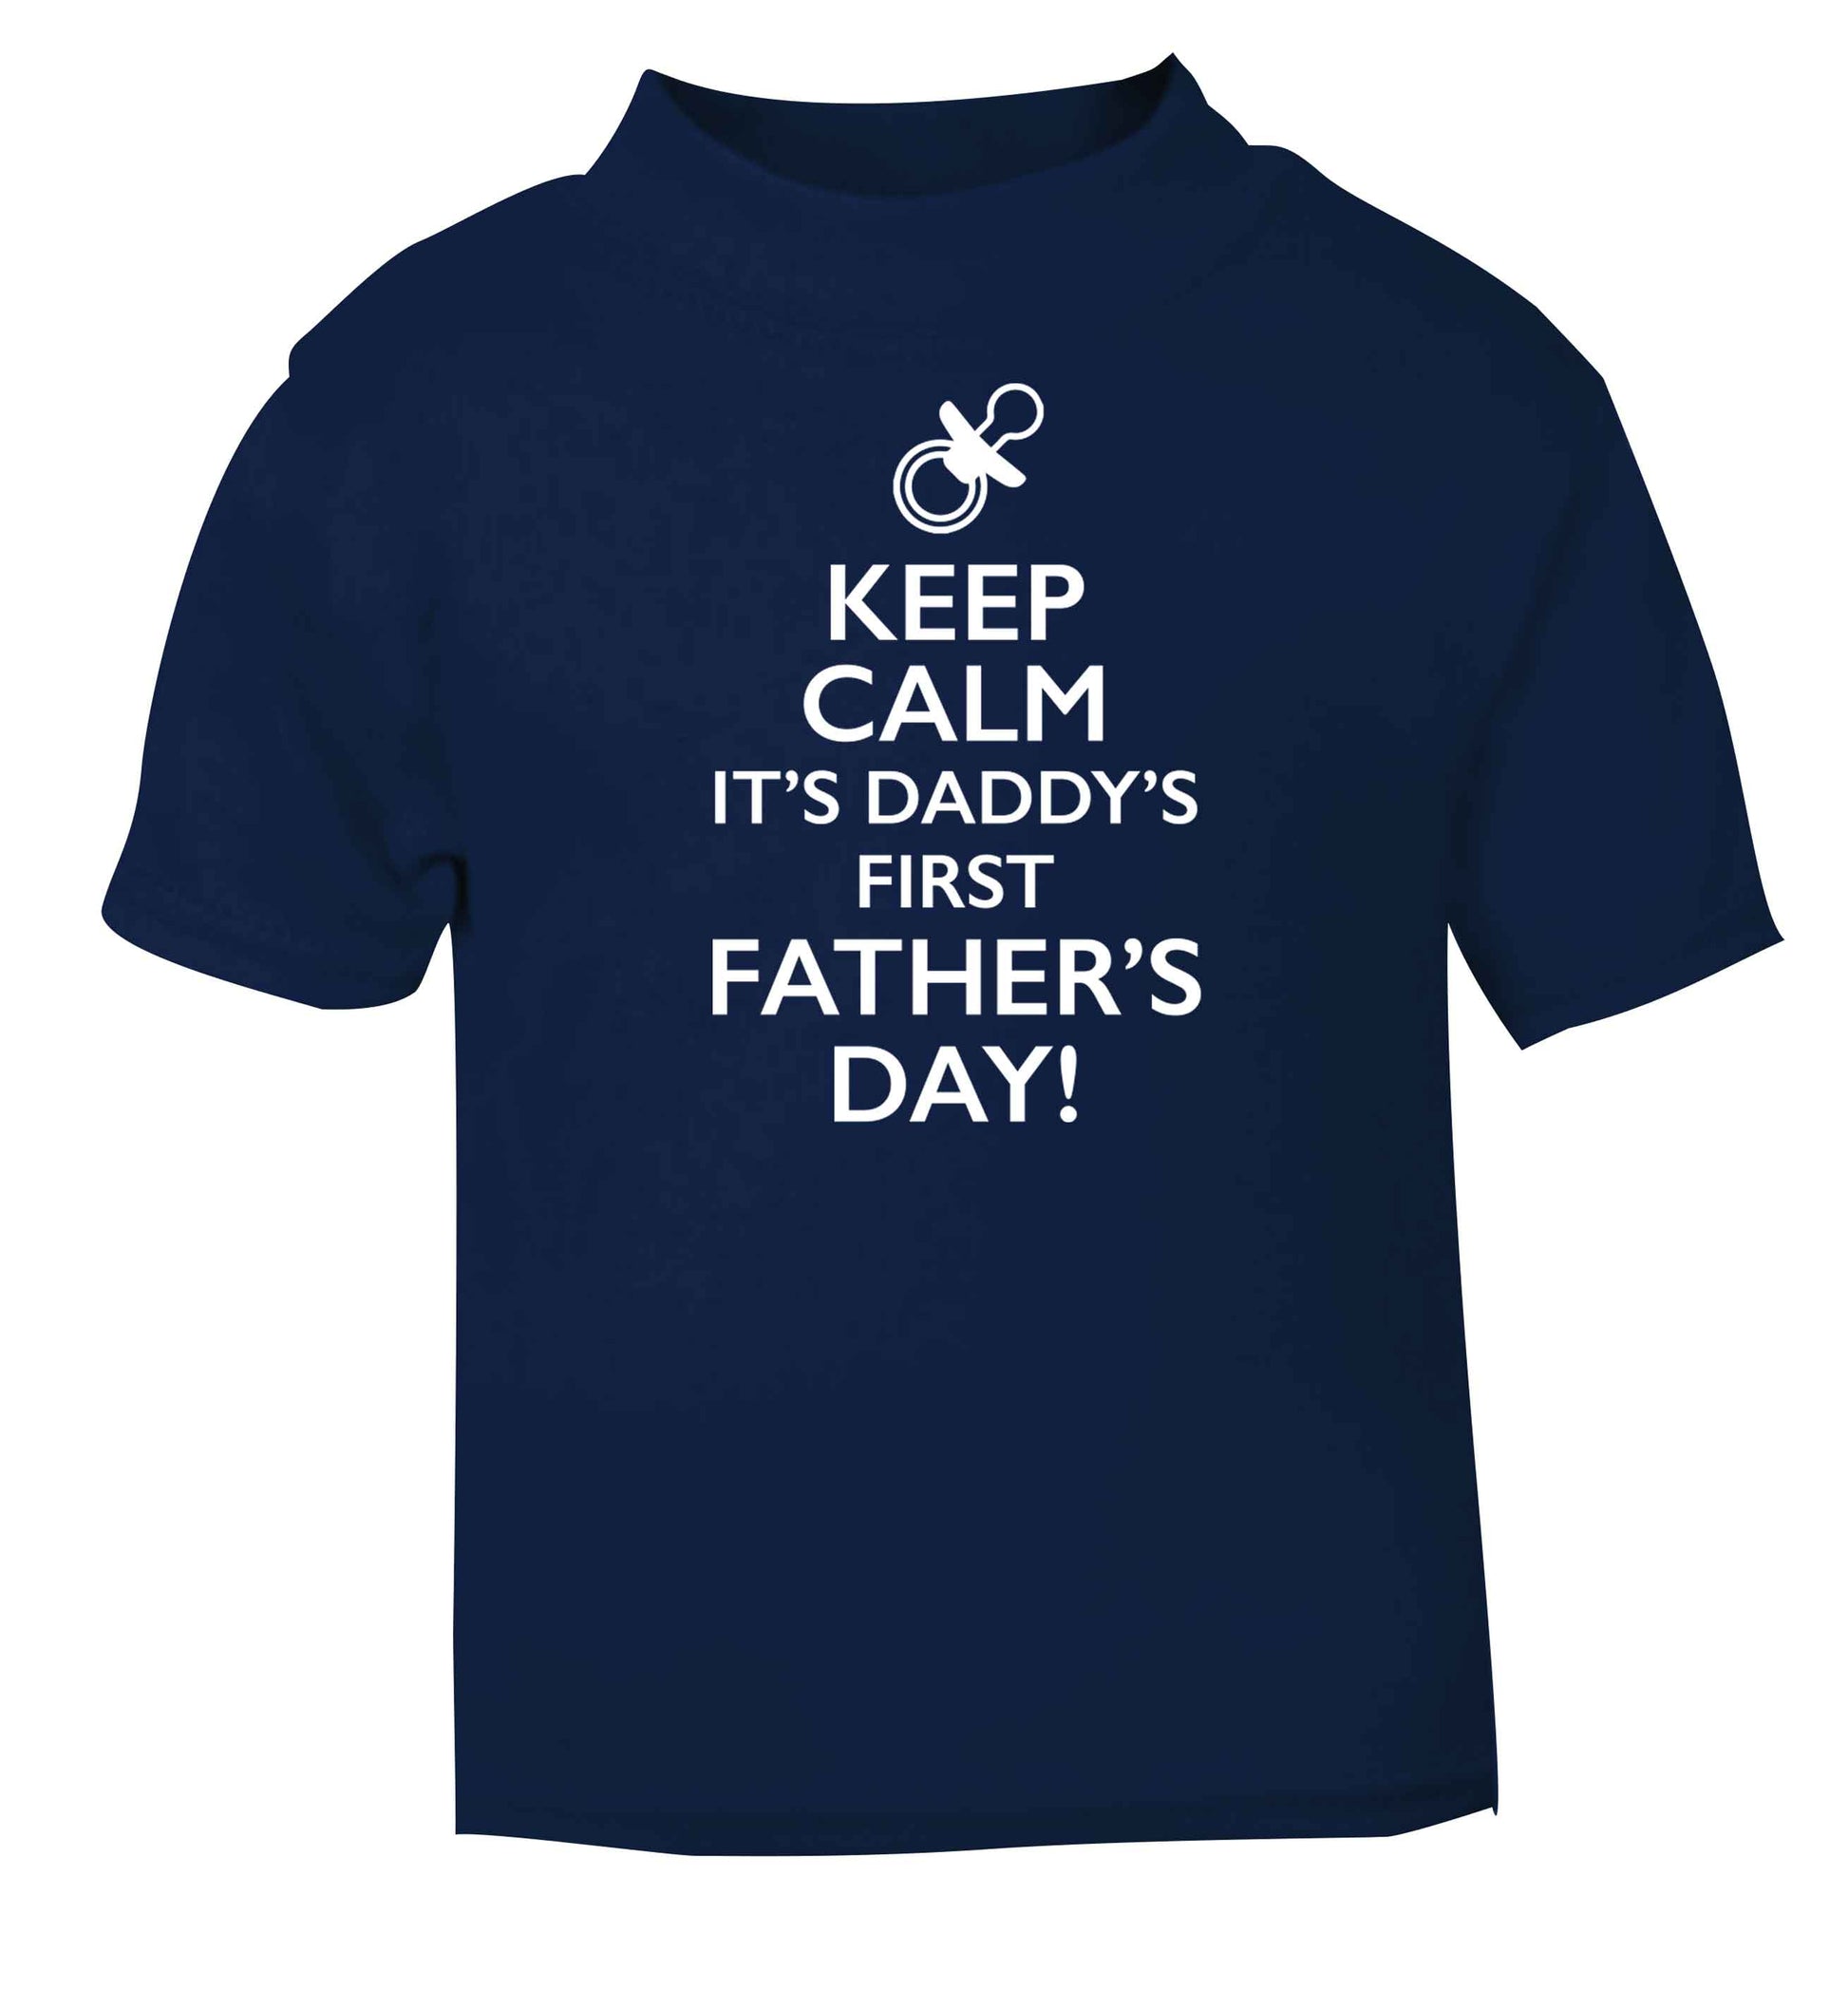 Keep calm it's daddys first father's day navy baby toddler Tshirt 2 Years